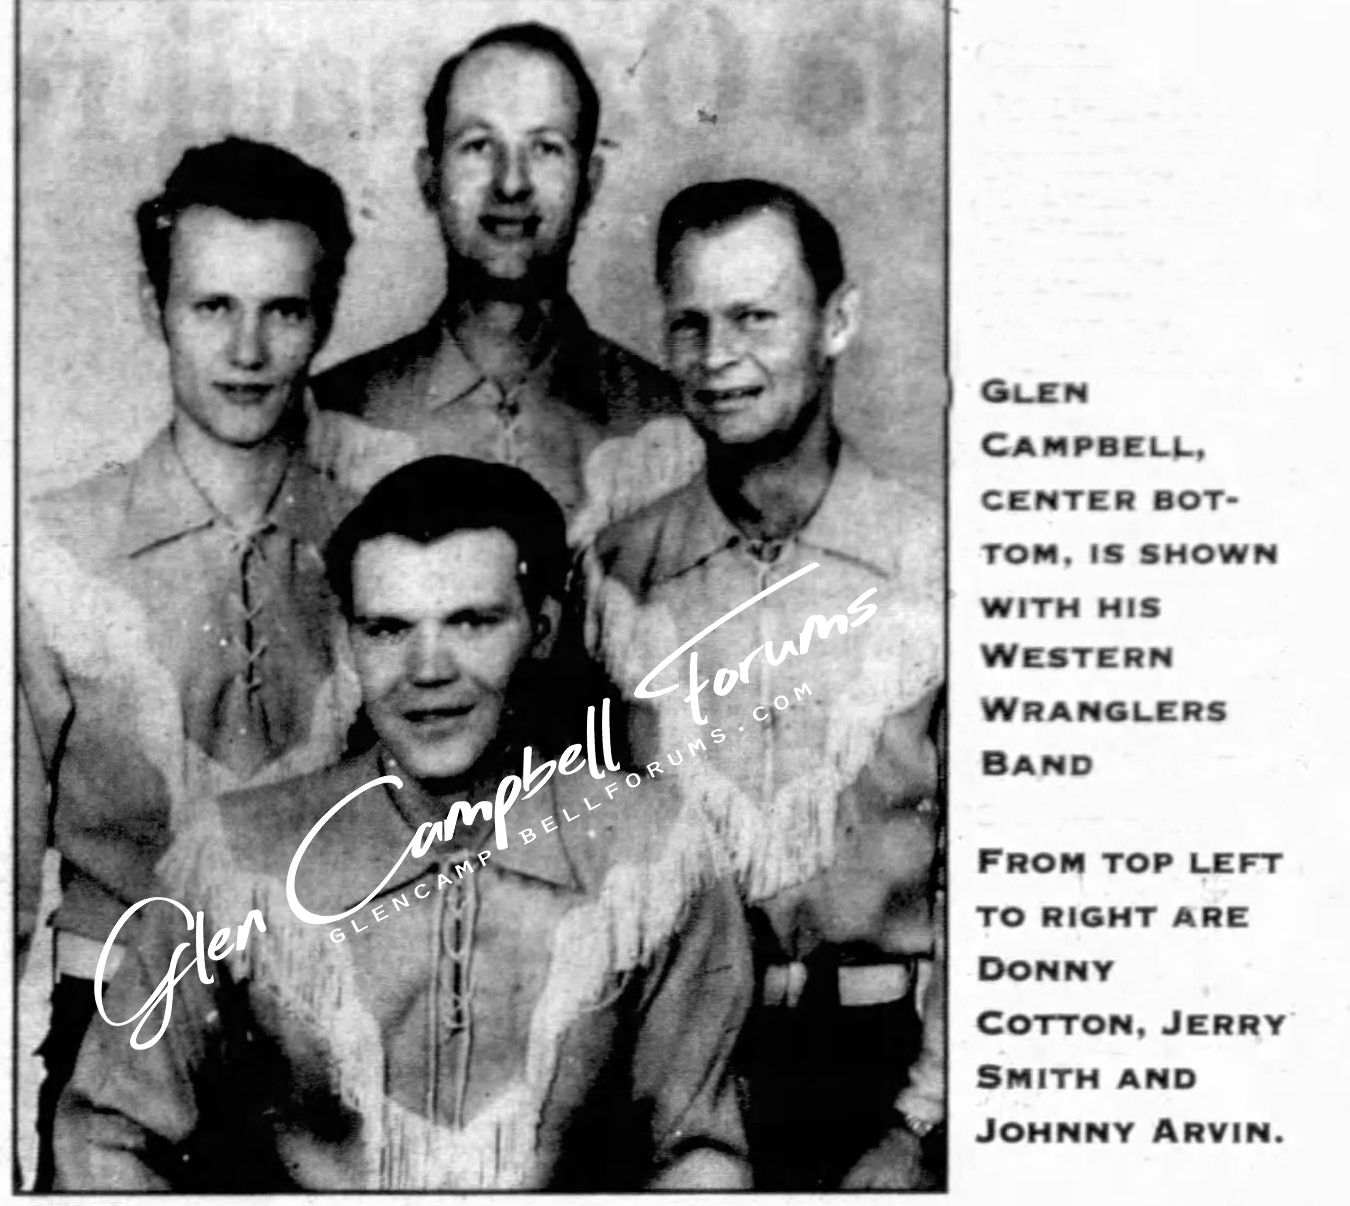 Glen Campbell and the Western Wranglers